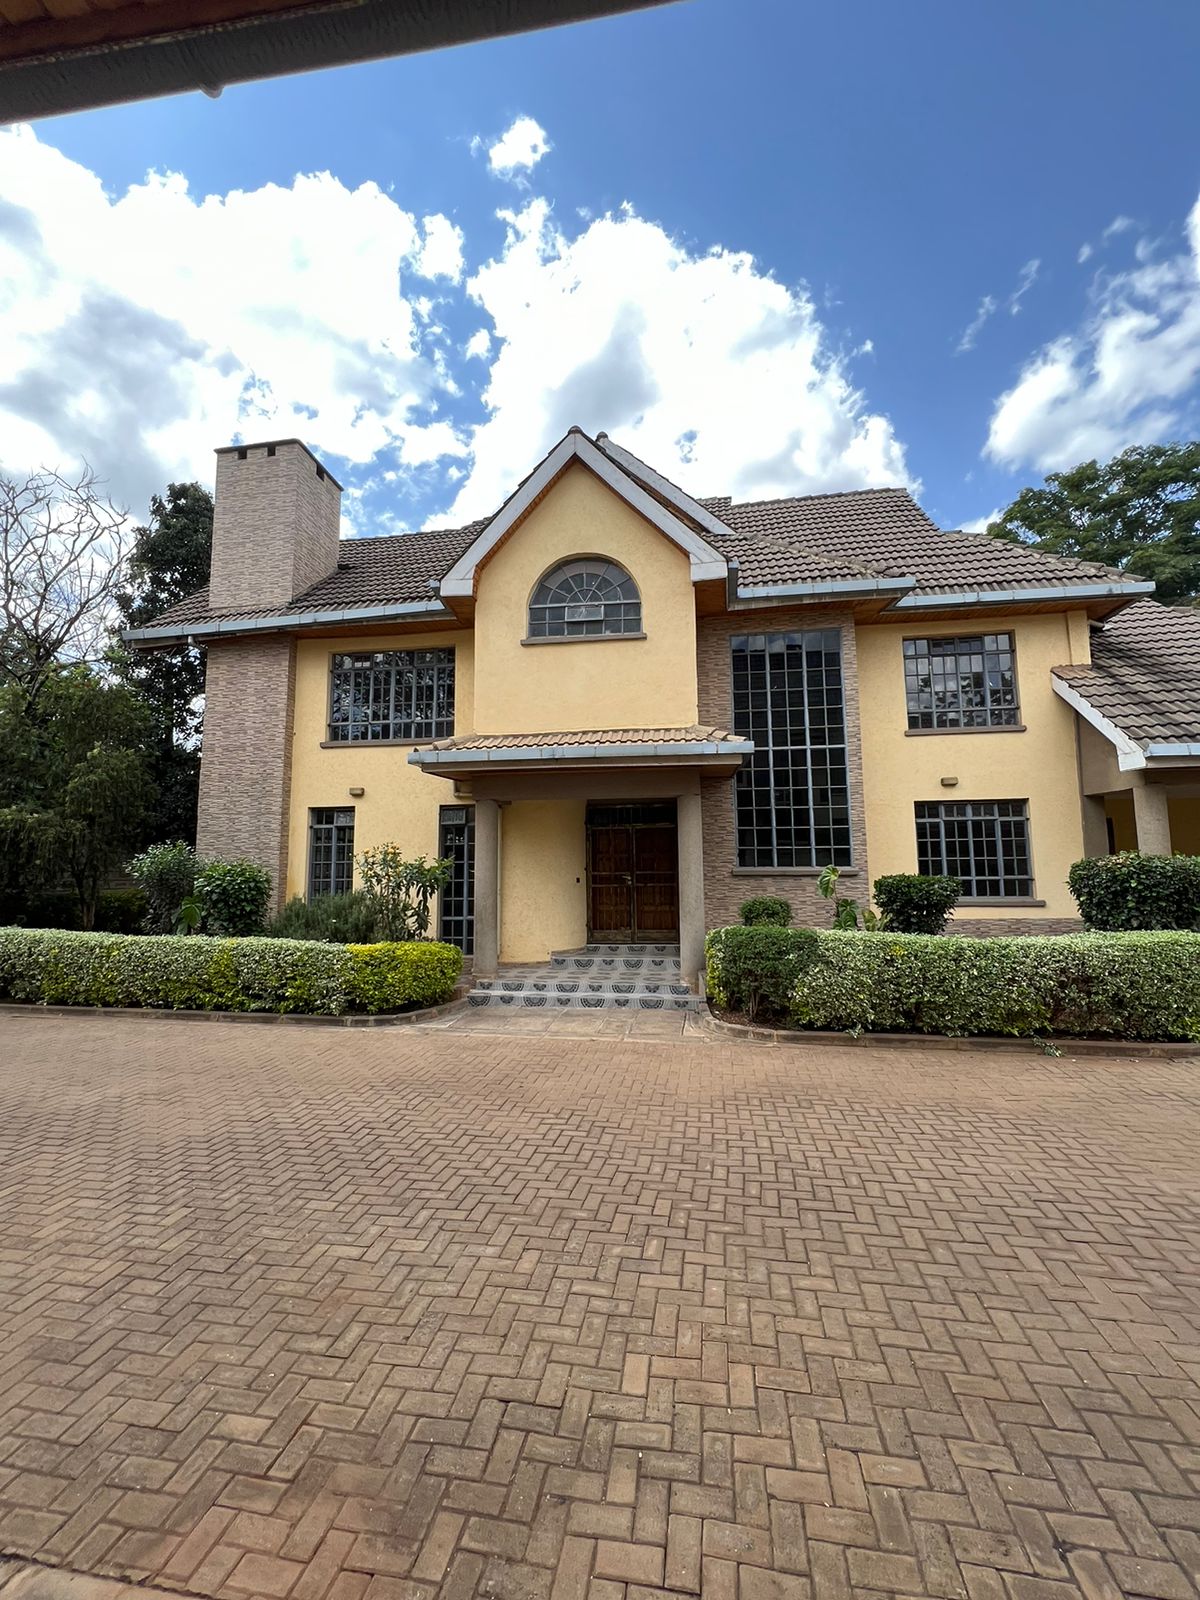 Spacious modern 5 bedroom plus dsq townhouse to let in lavington. Near Lavington shopping mall. Rent per month 250K Musilli Homes